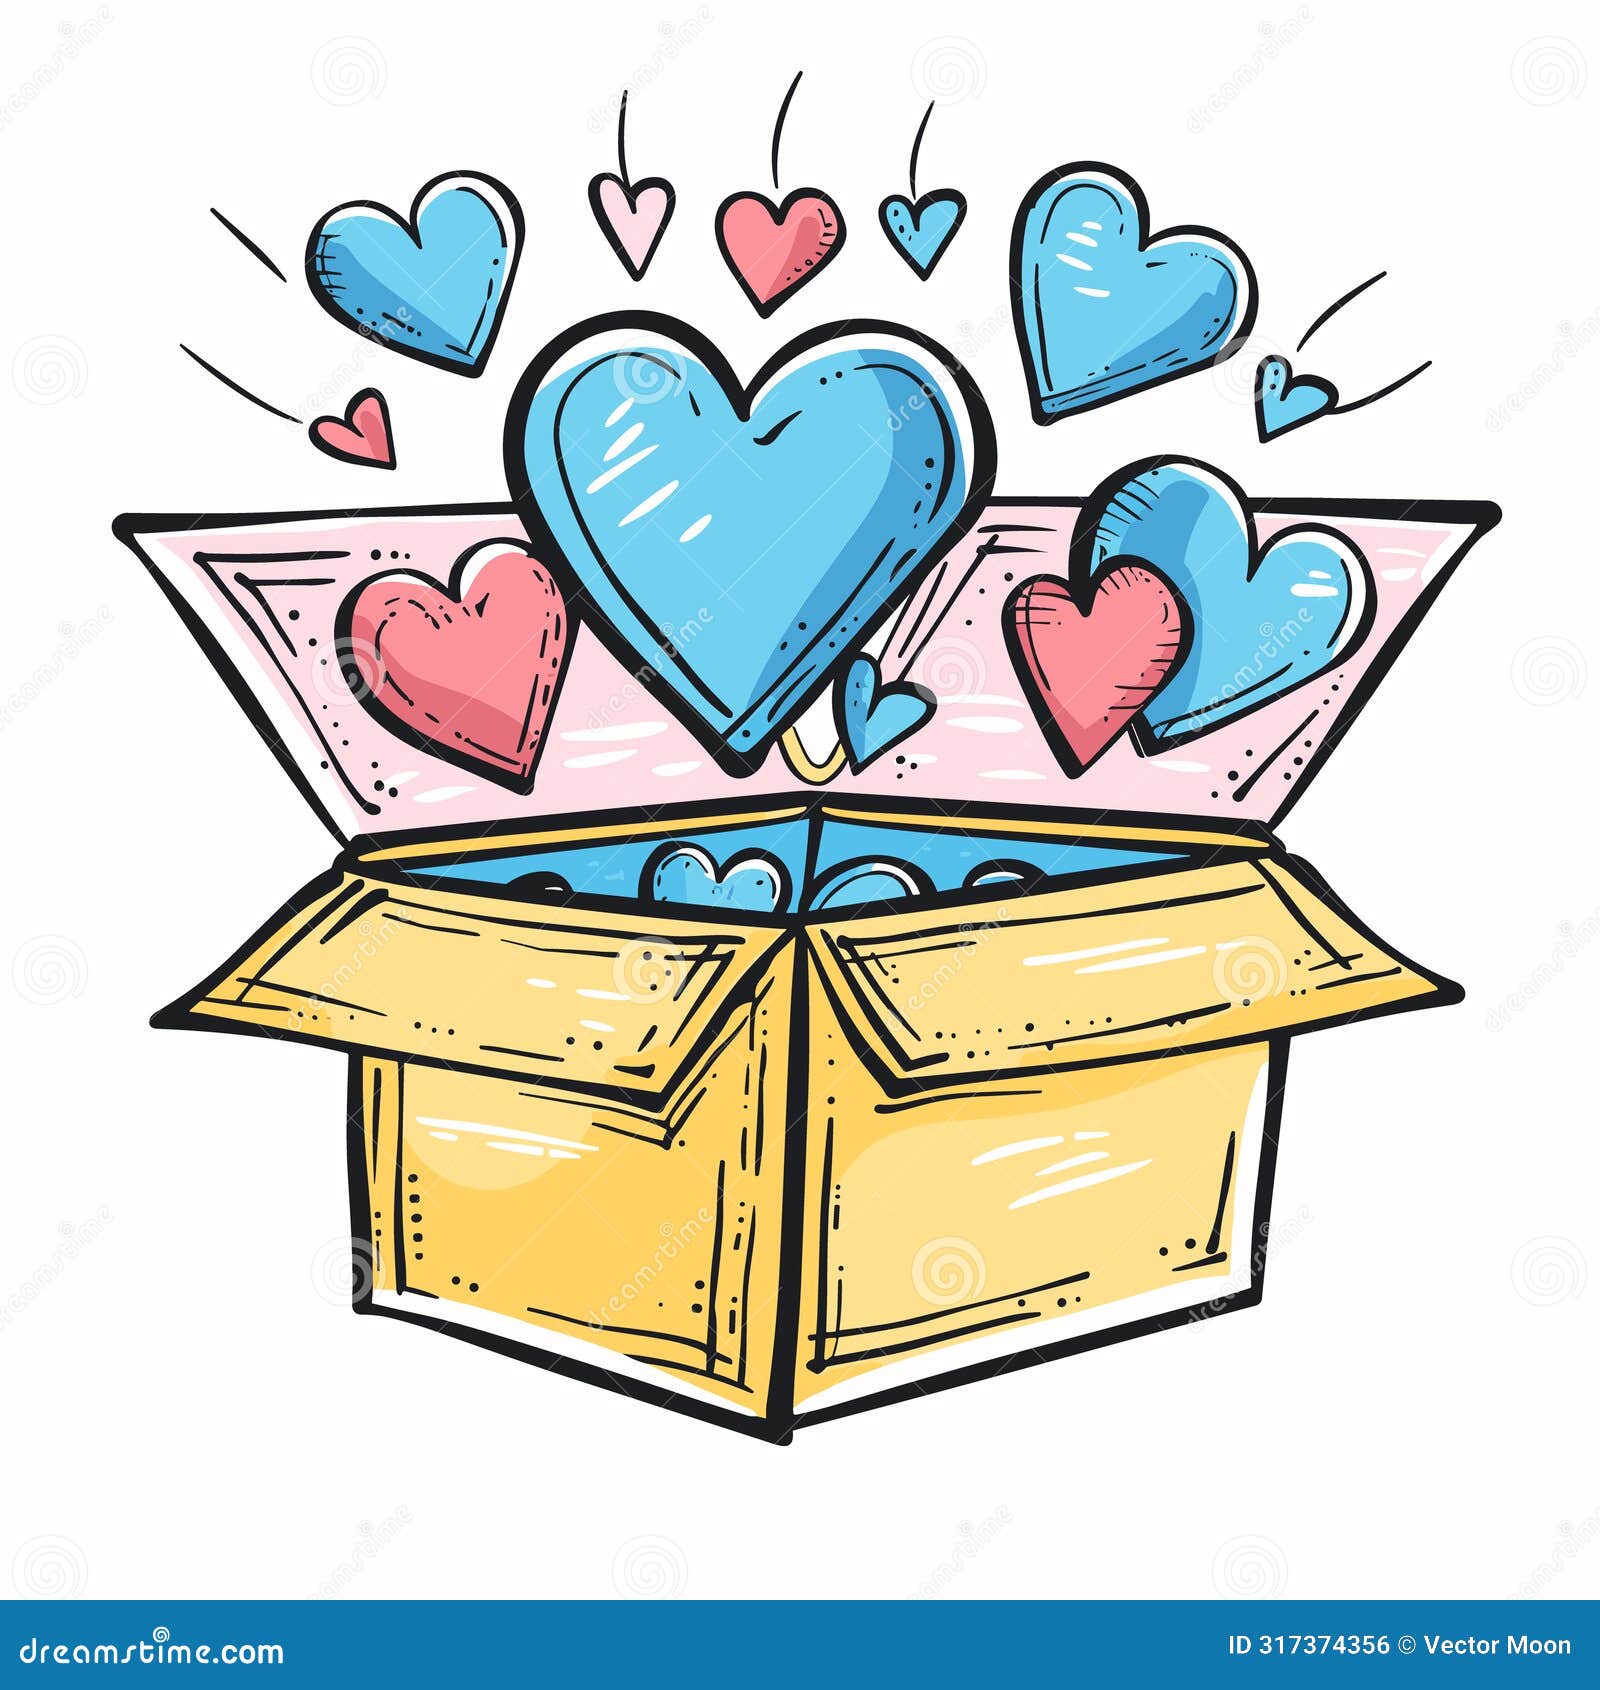 colorful hearts overflowing yellow box, izing love, care, affection. cartoon hearts shades